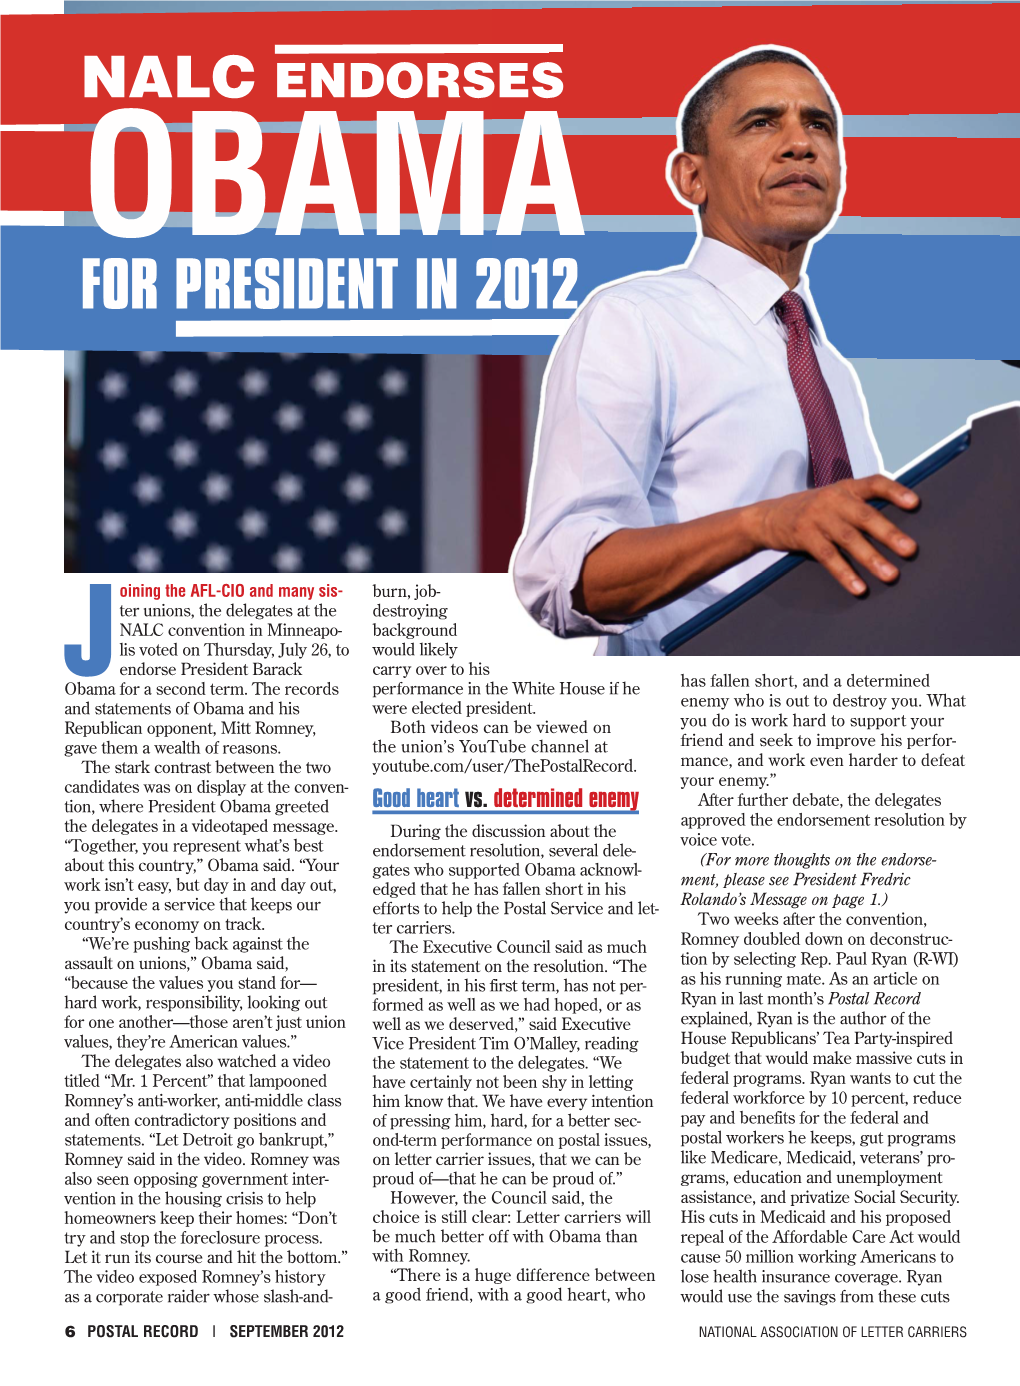 NALC Endorses Obama for President in 2012; Includes Congressional